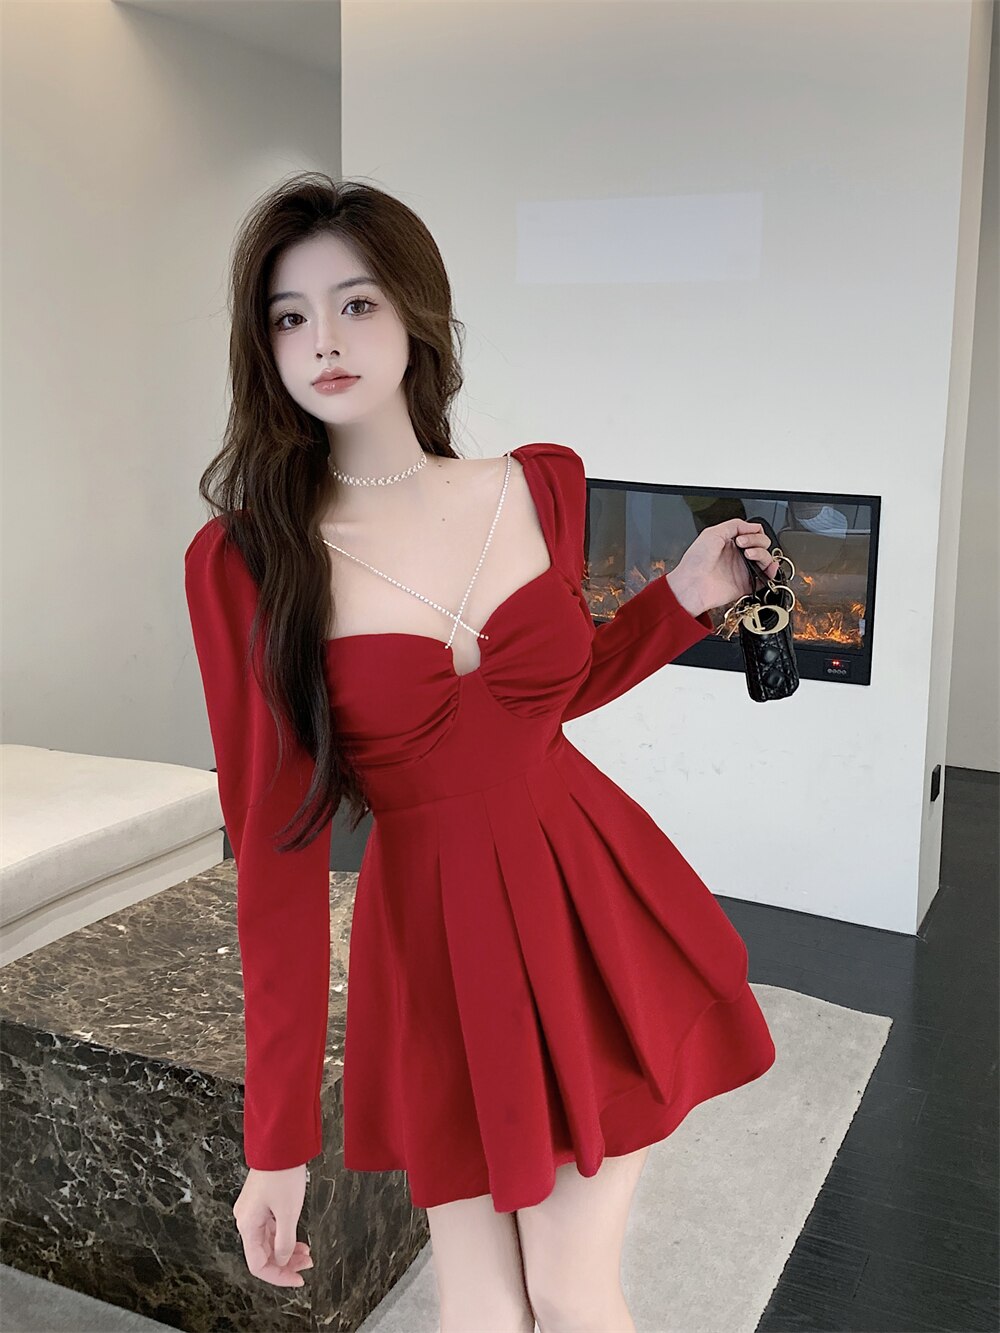 Clacive Women Long Sleeve Square Collar Chains Dress High Waist Pleated Short Dresses Female Sexy But Cute Cute Out Dresses Female